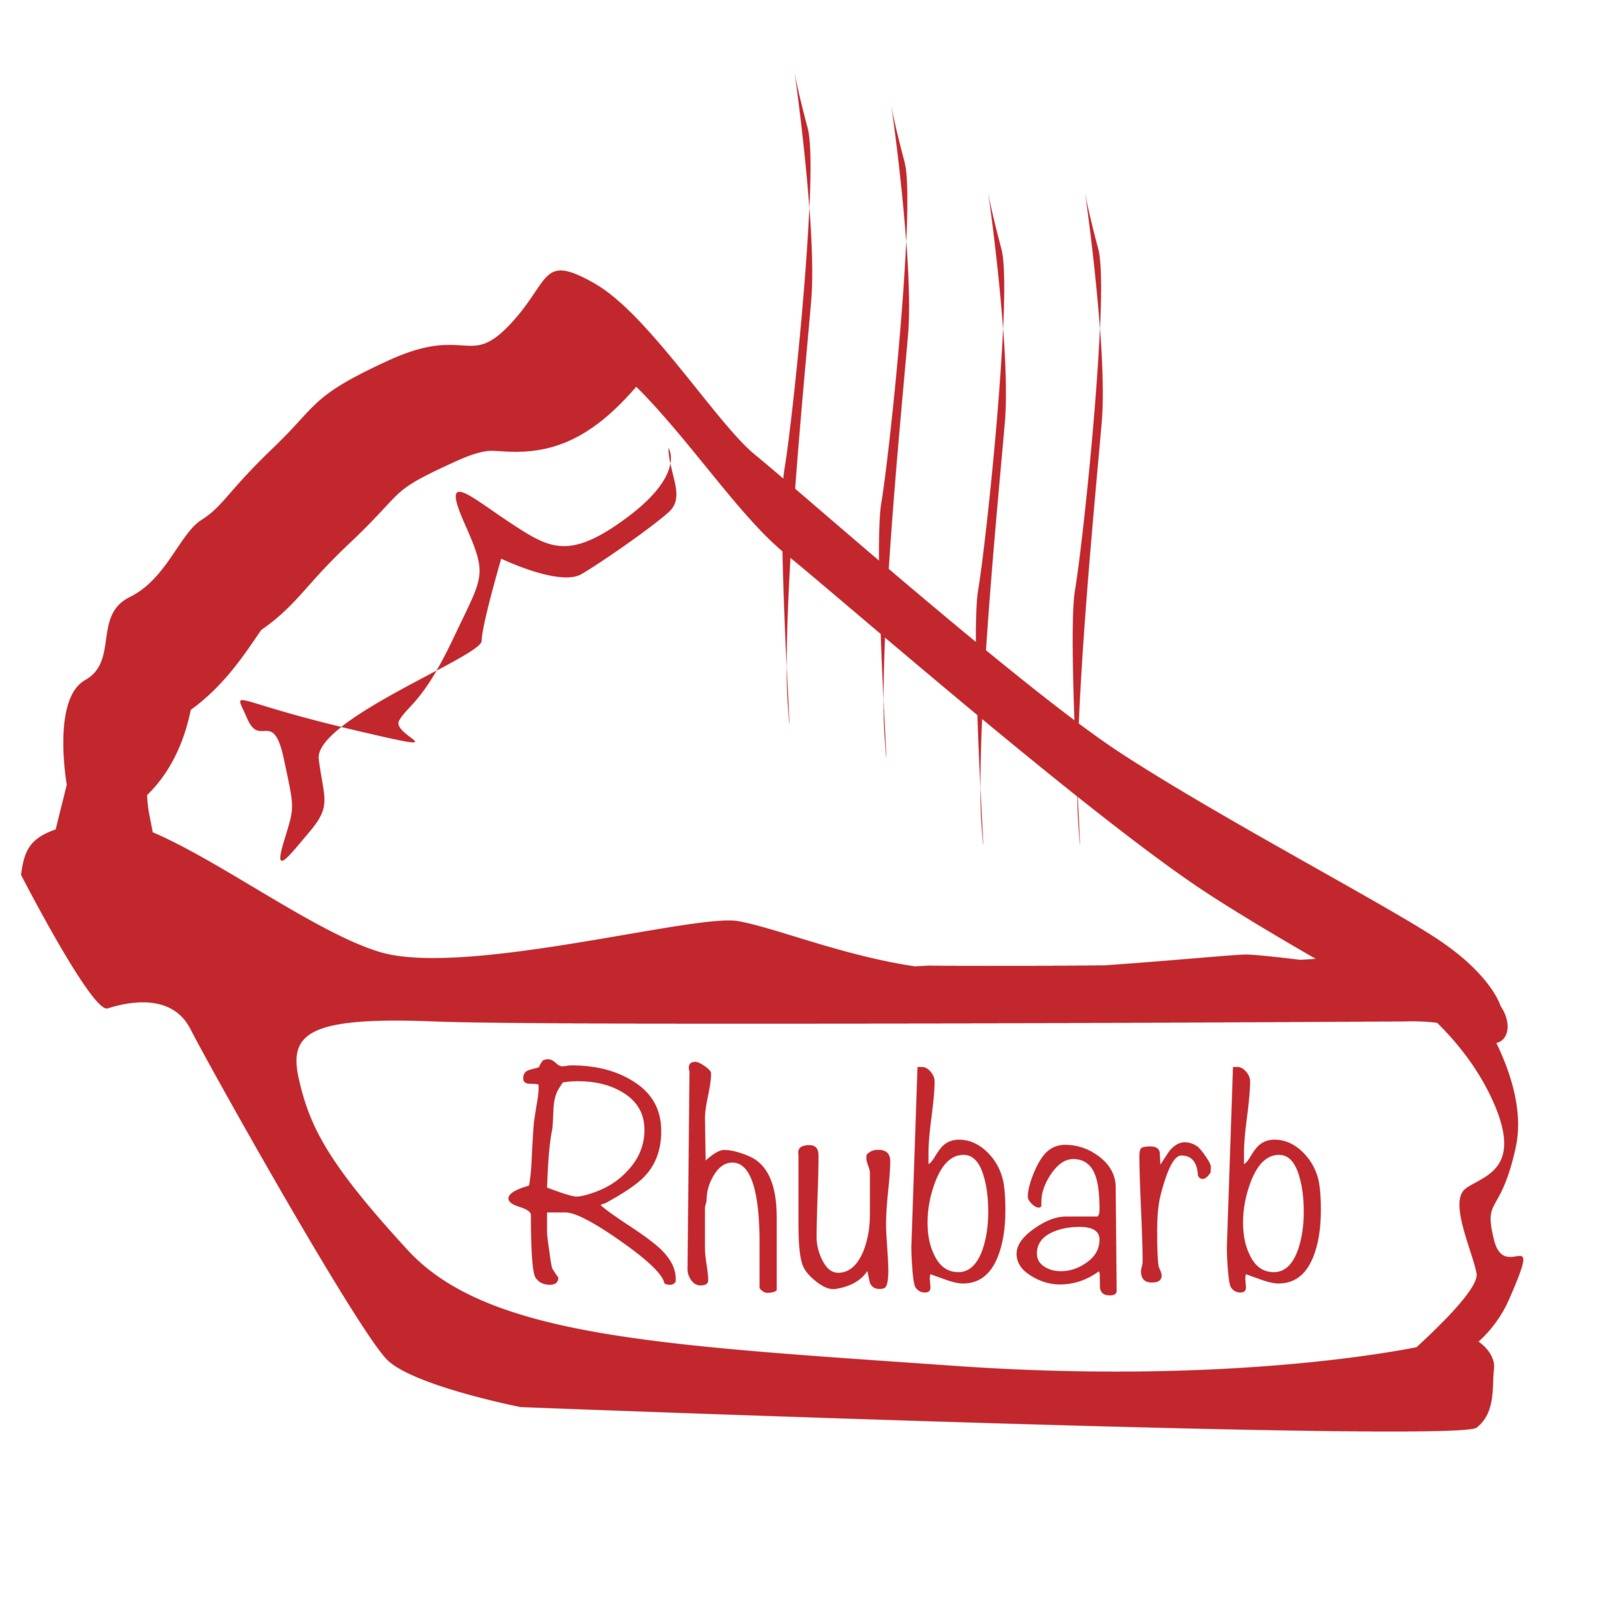 Cartoon depiction of a hot Rhubarb pie over a white background